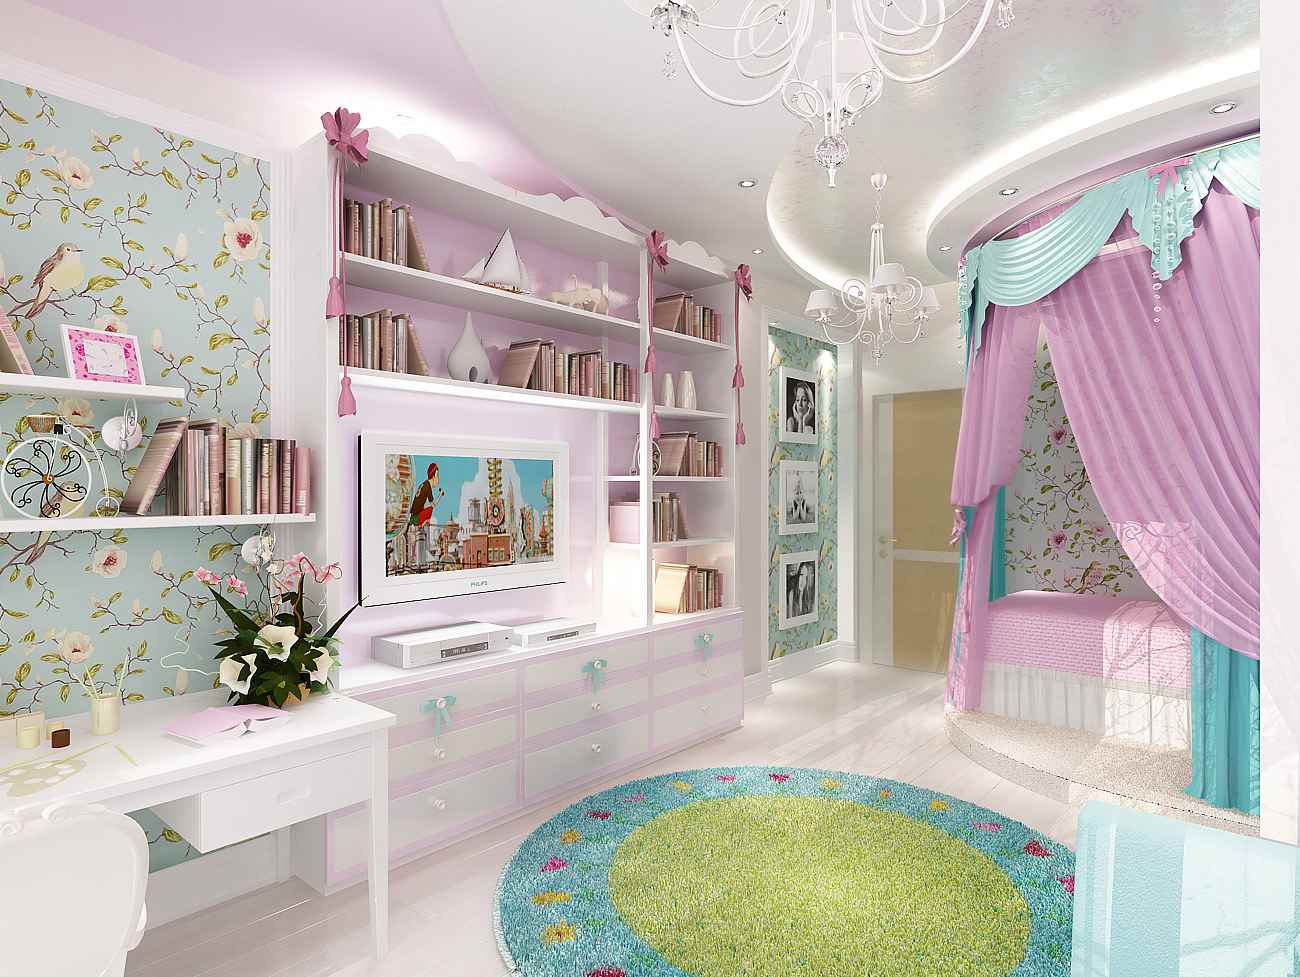 an example of an unusual interior of a children's room for a girl